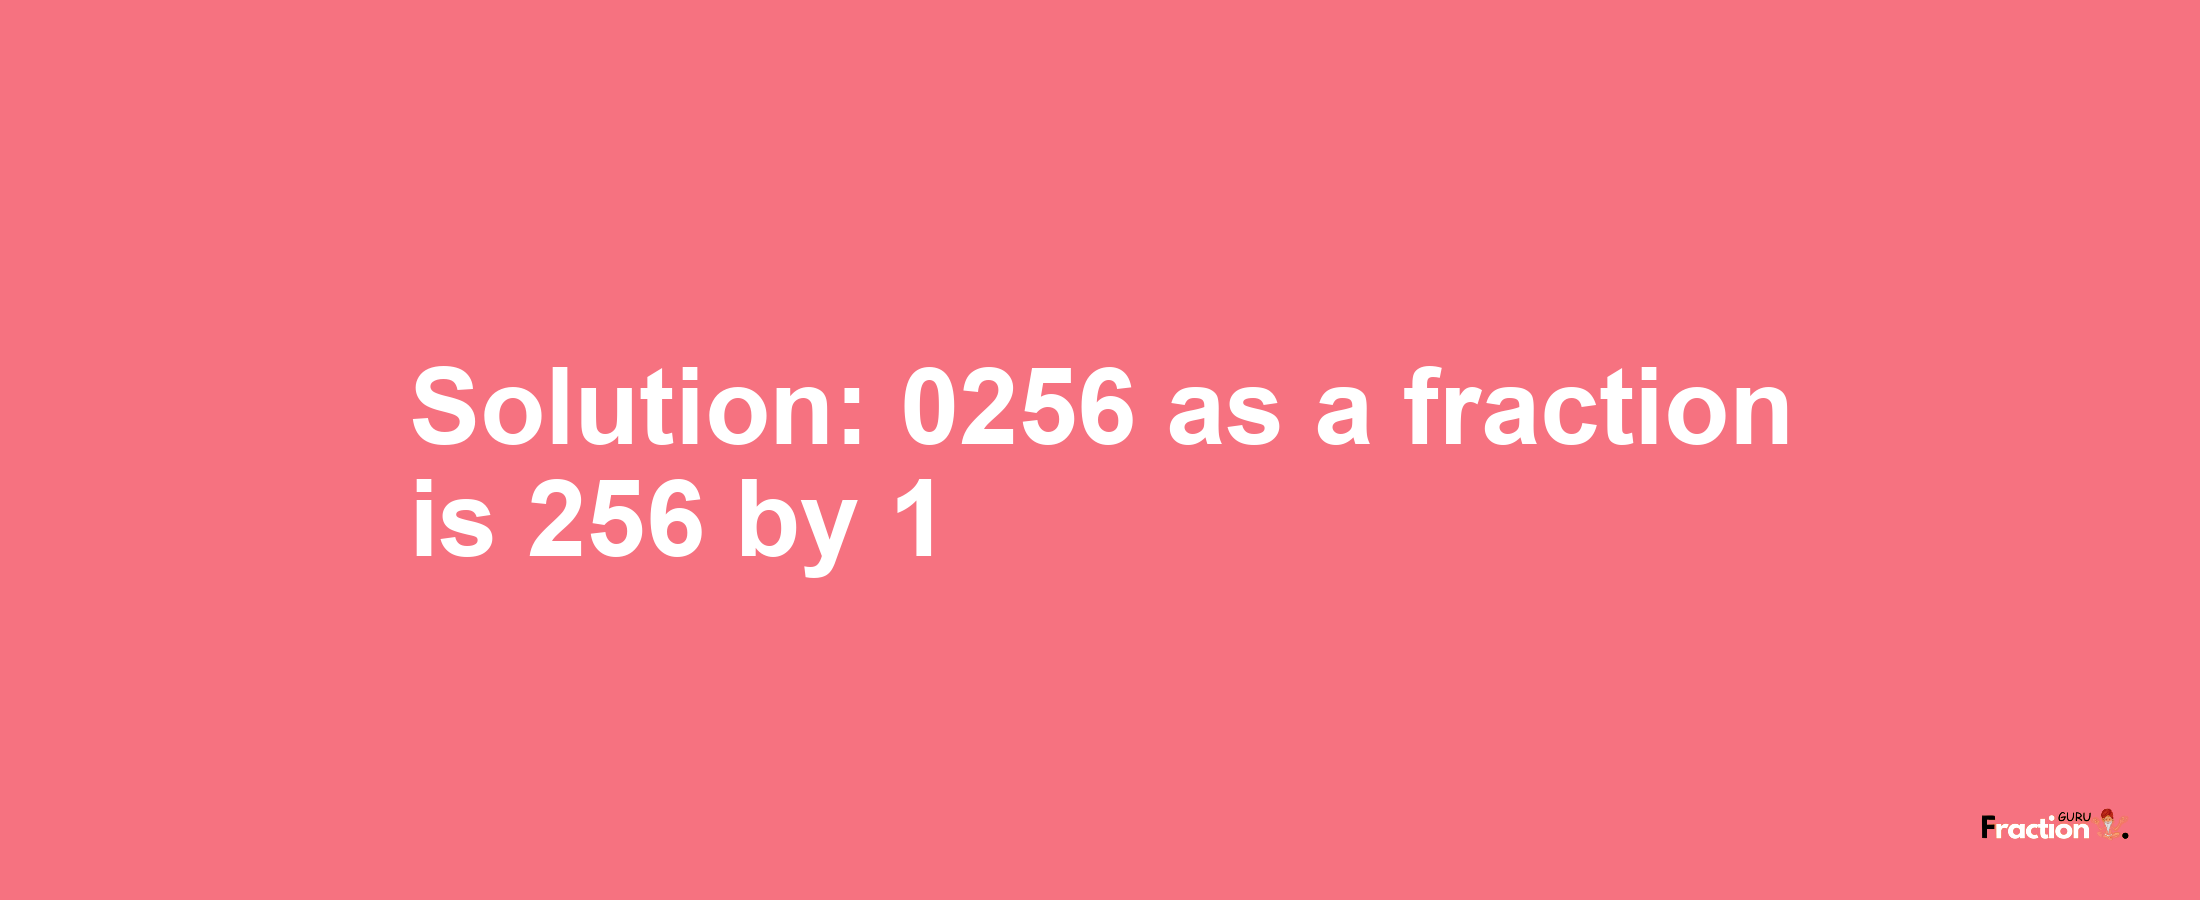 Solution:0256 as a fraction is 256/1